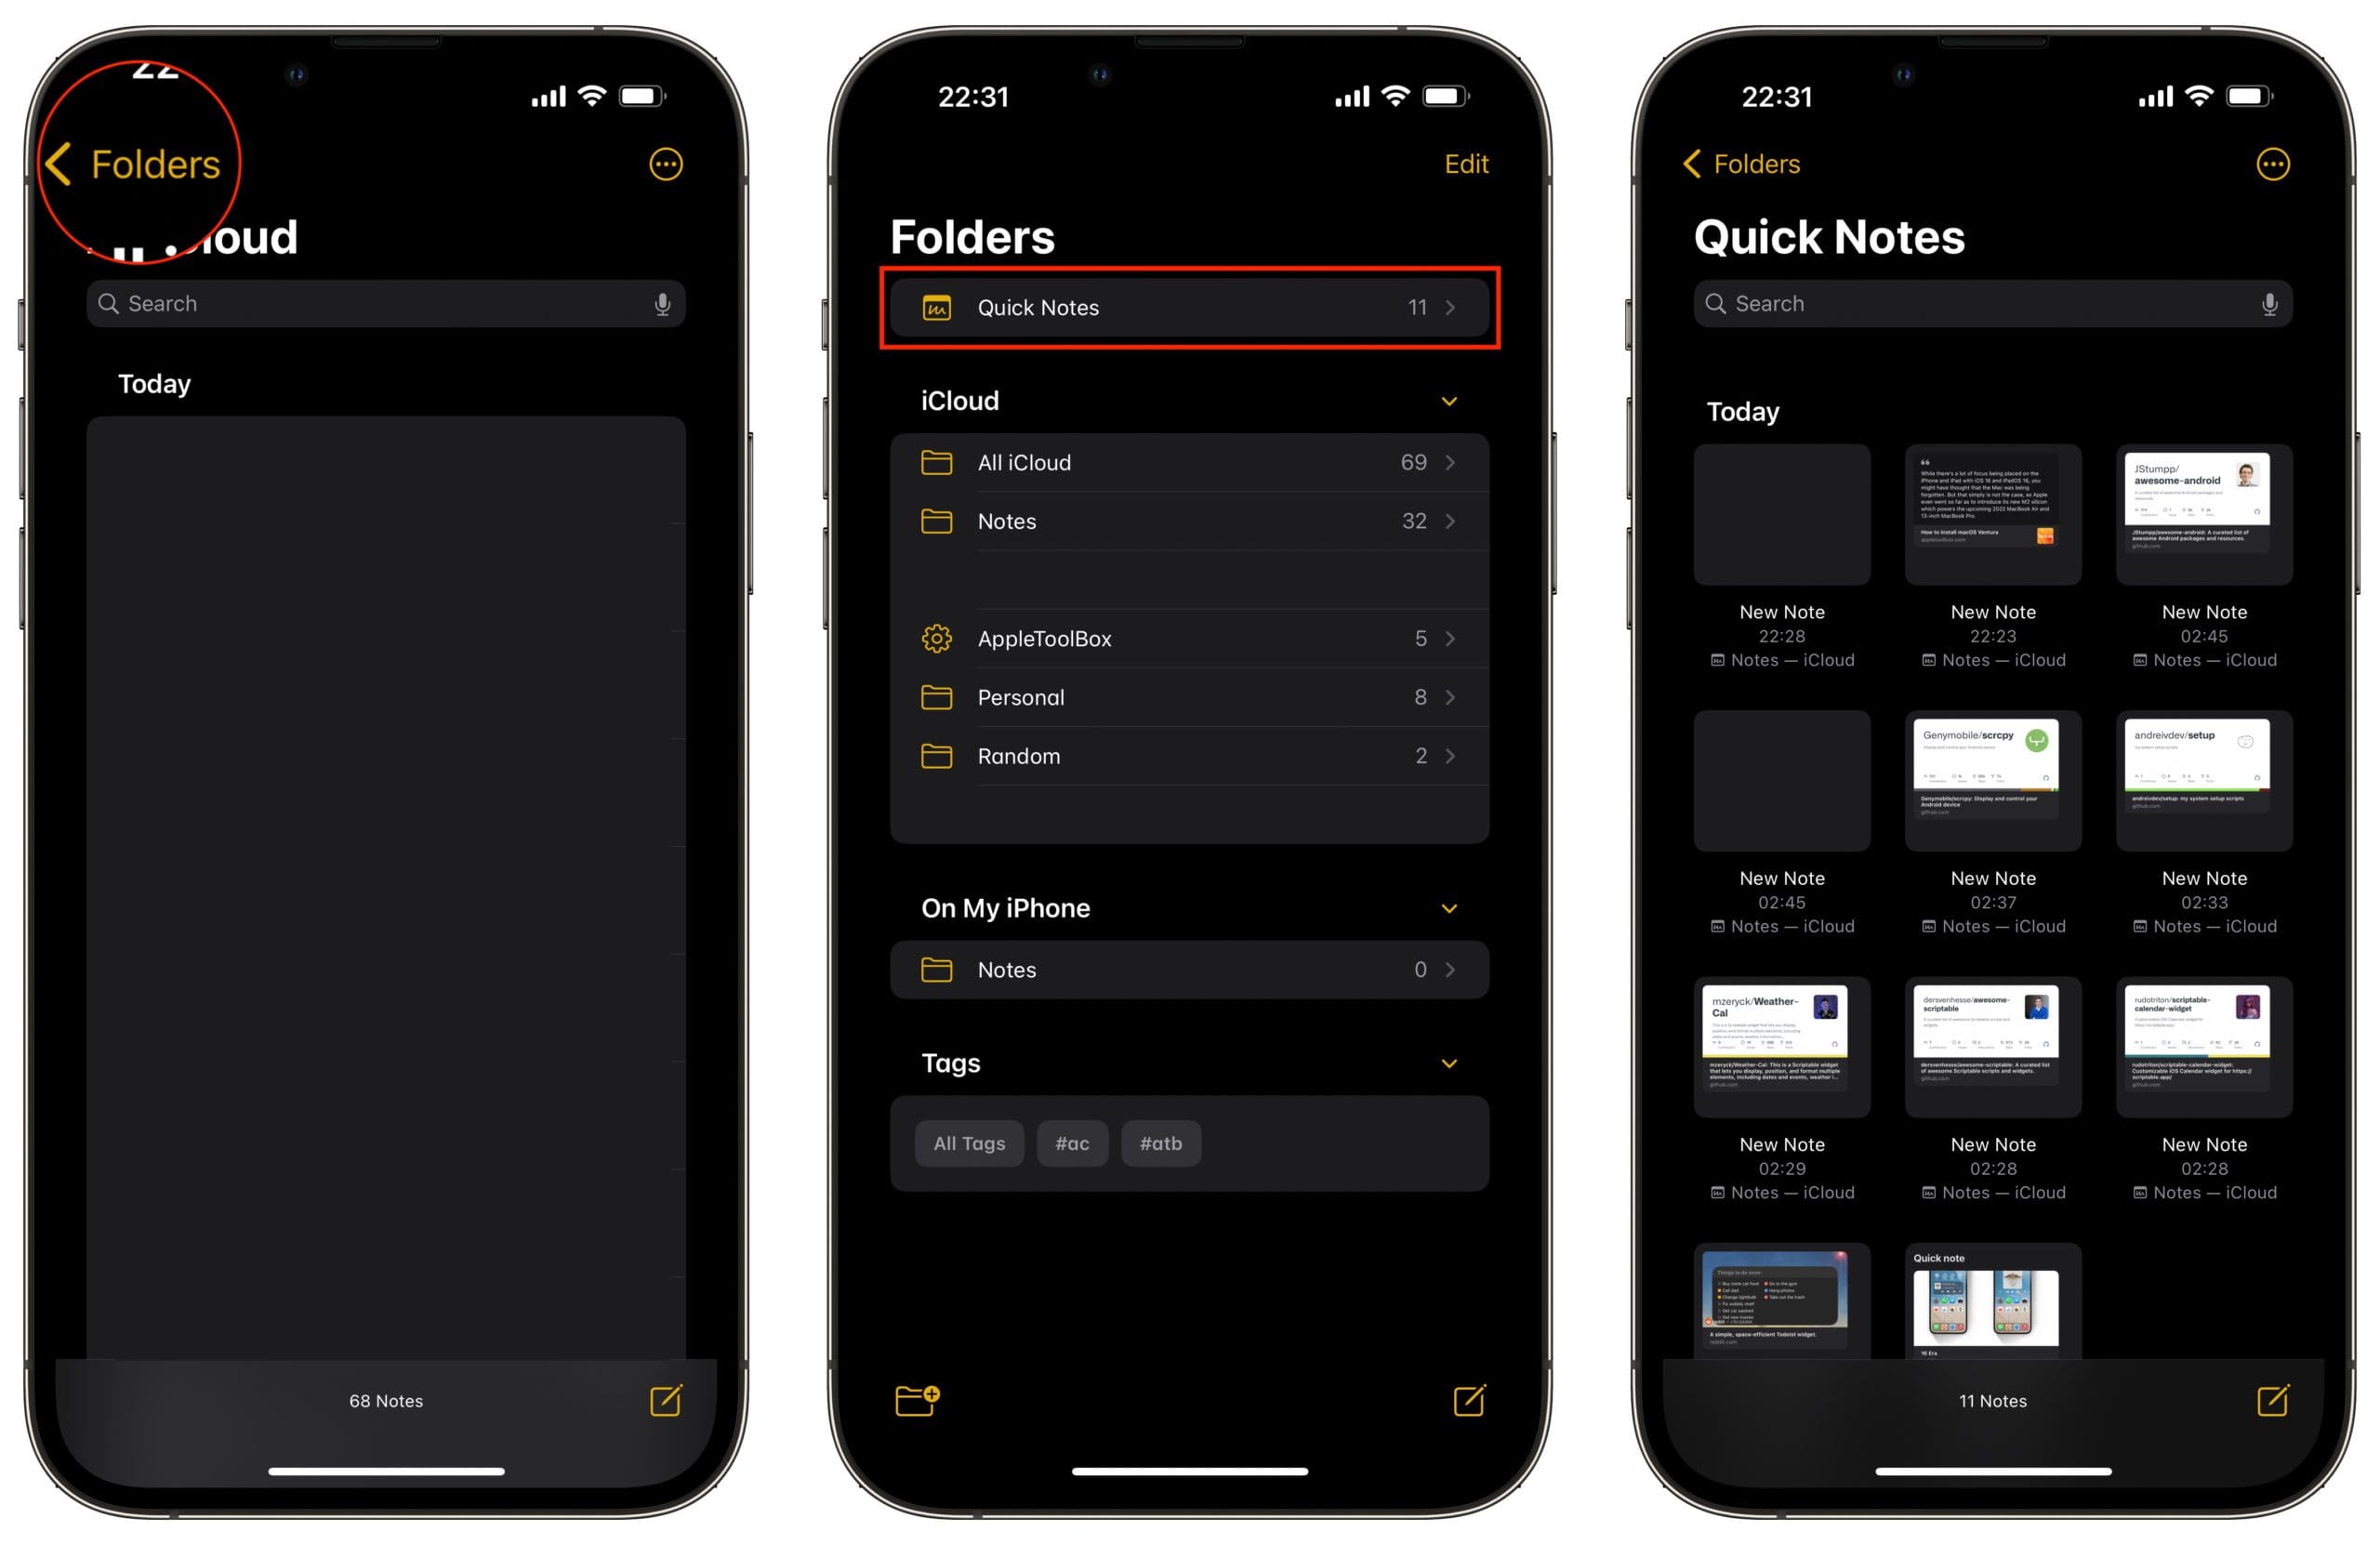 How to use Quick Note on iPhone - Access Quick Notes